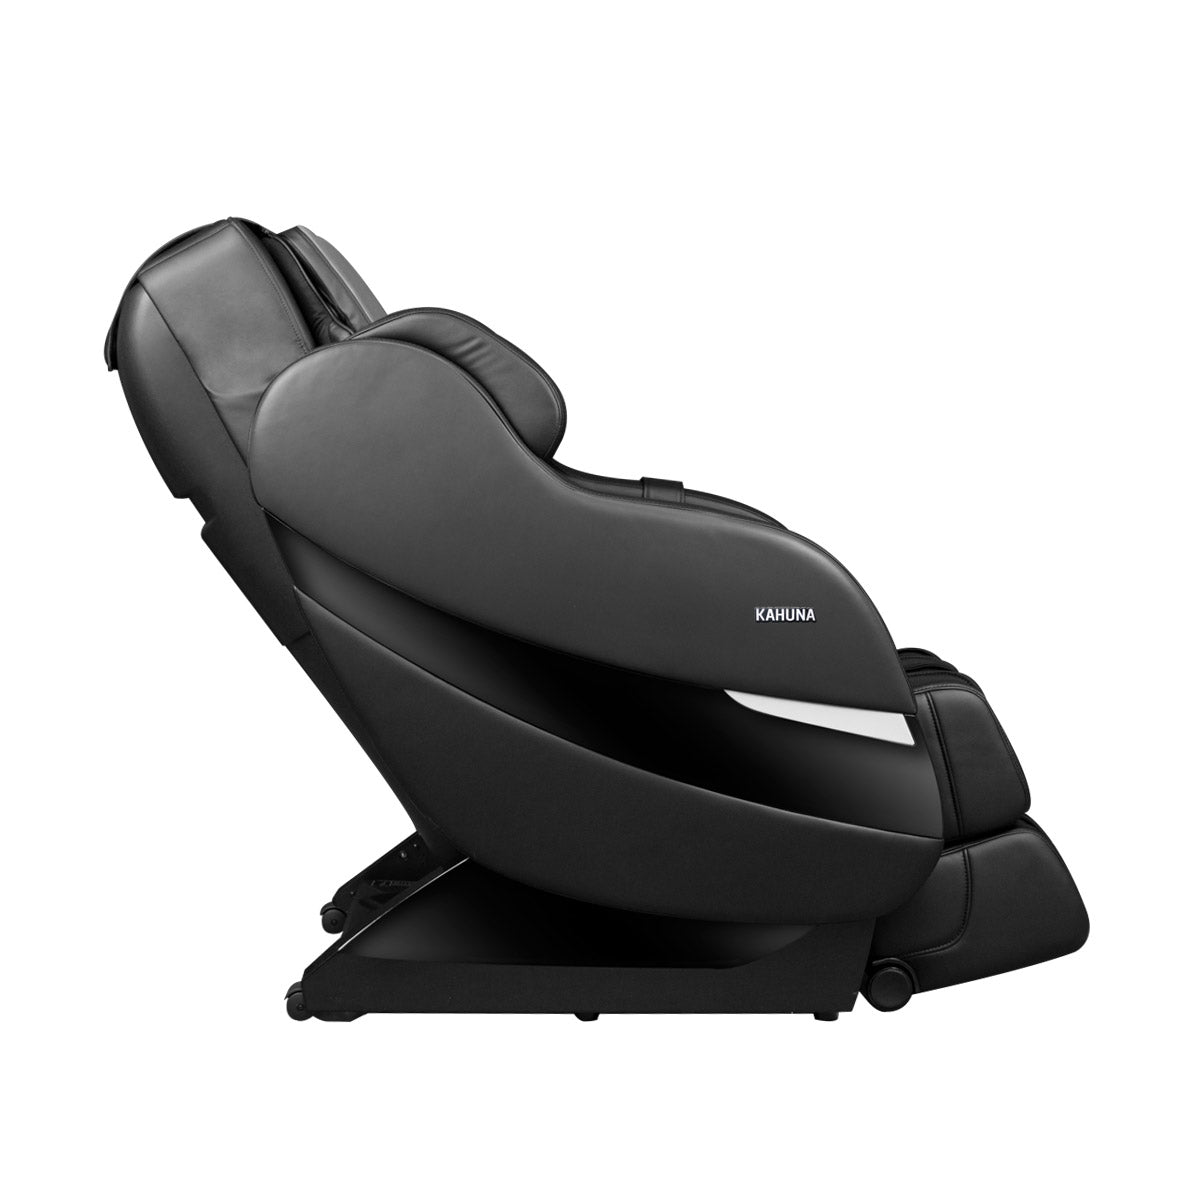 Kahuna SM-7300 Massage Chair Right Side View